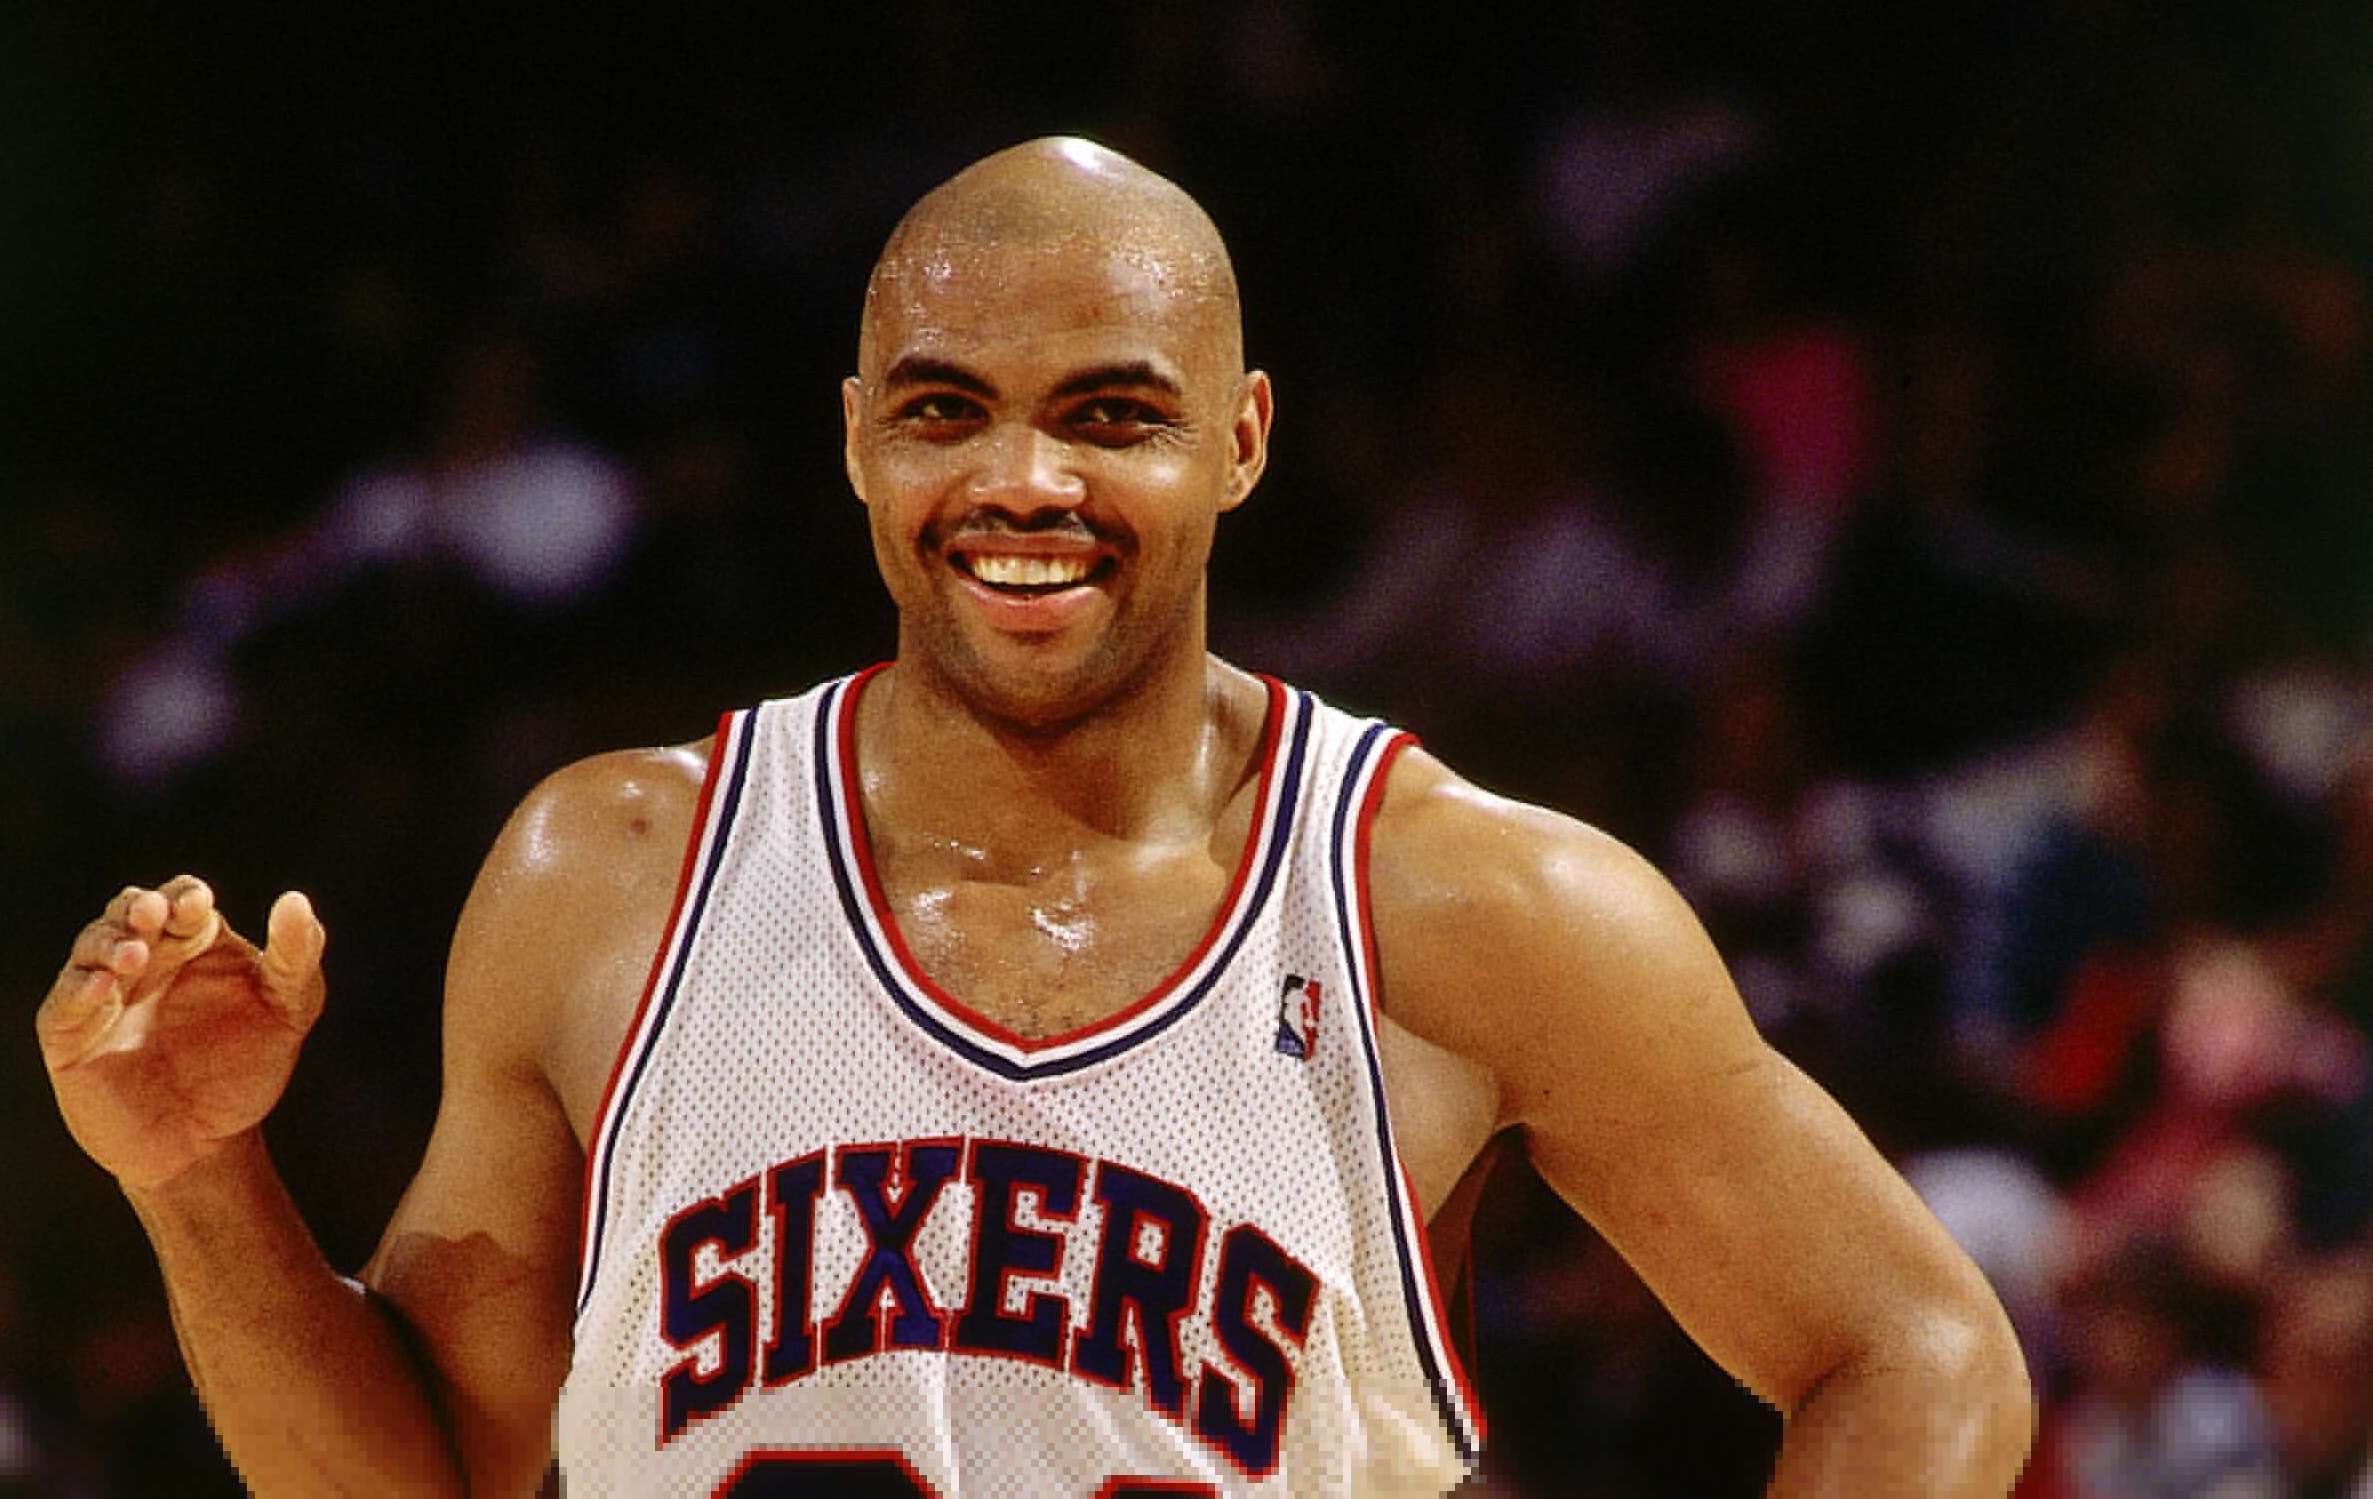 Charles Barkley Net Worth and Source of Income